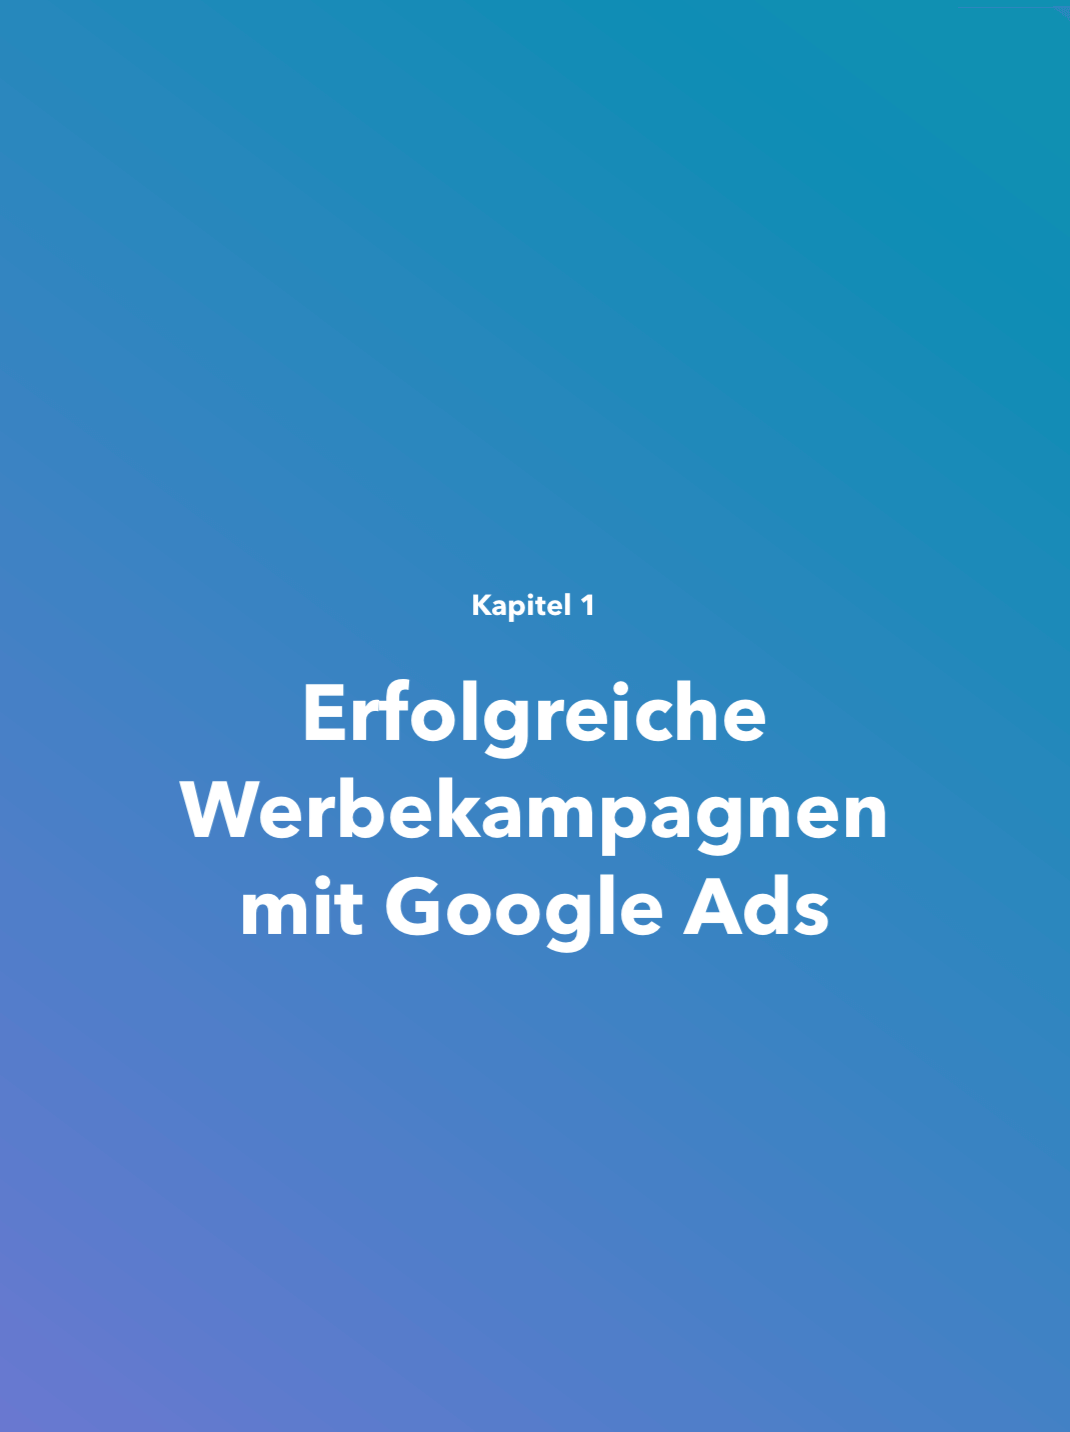 2020 Google Ads Guide Preview 5